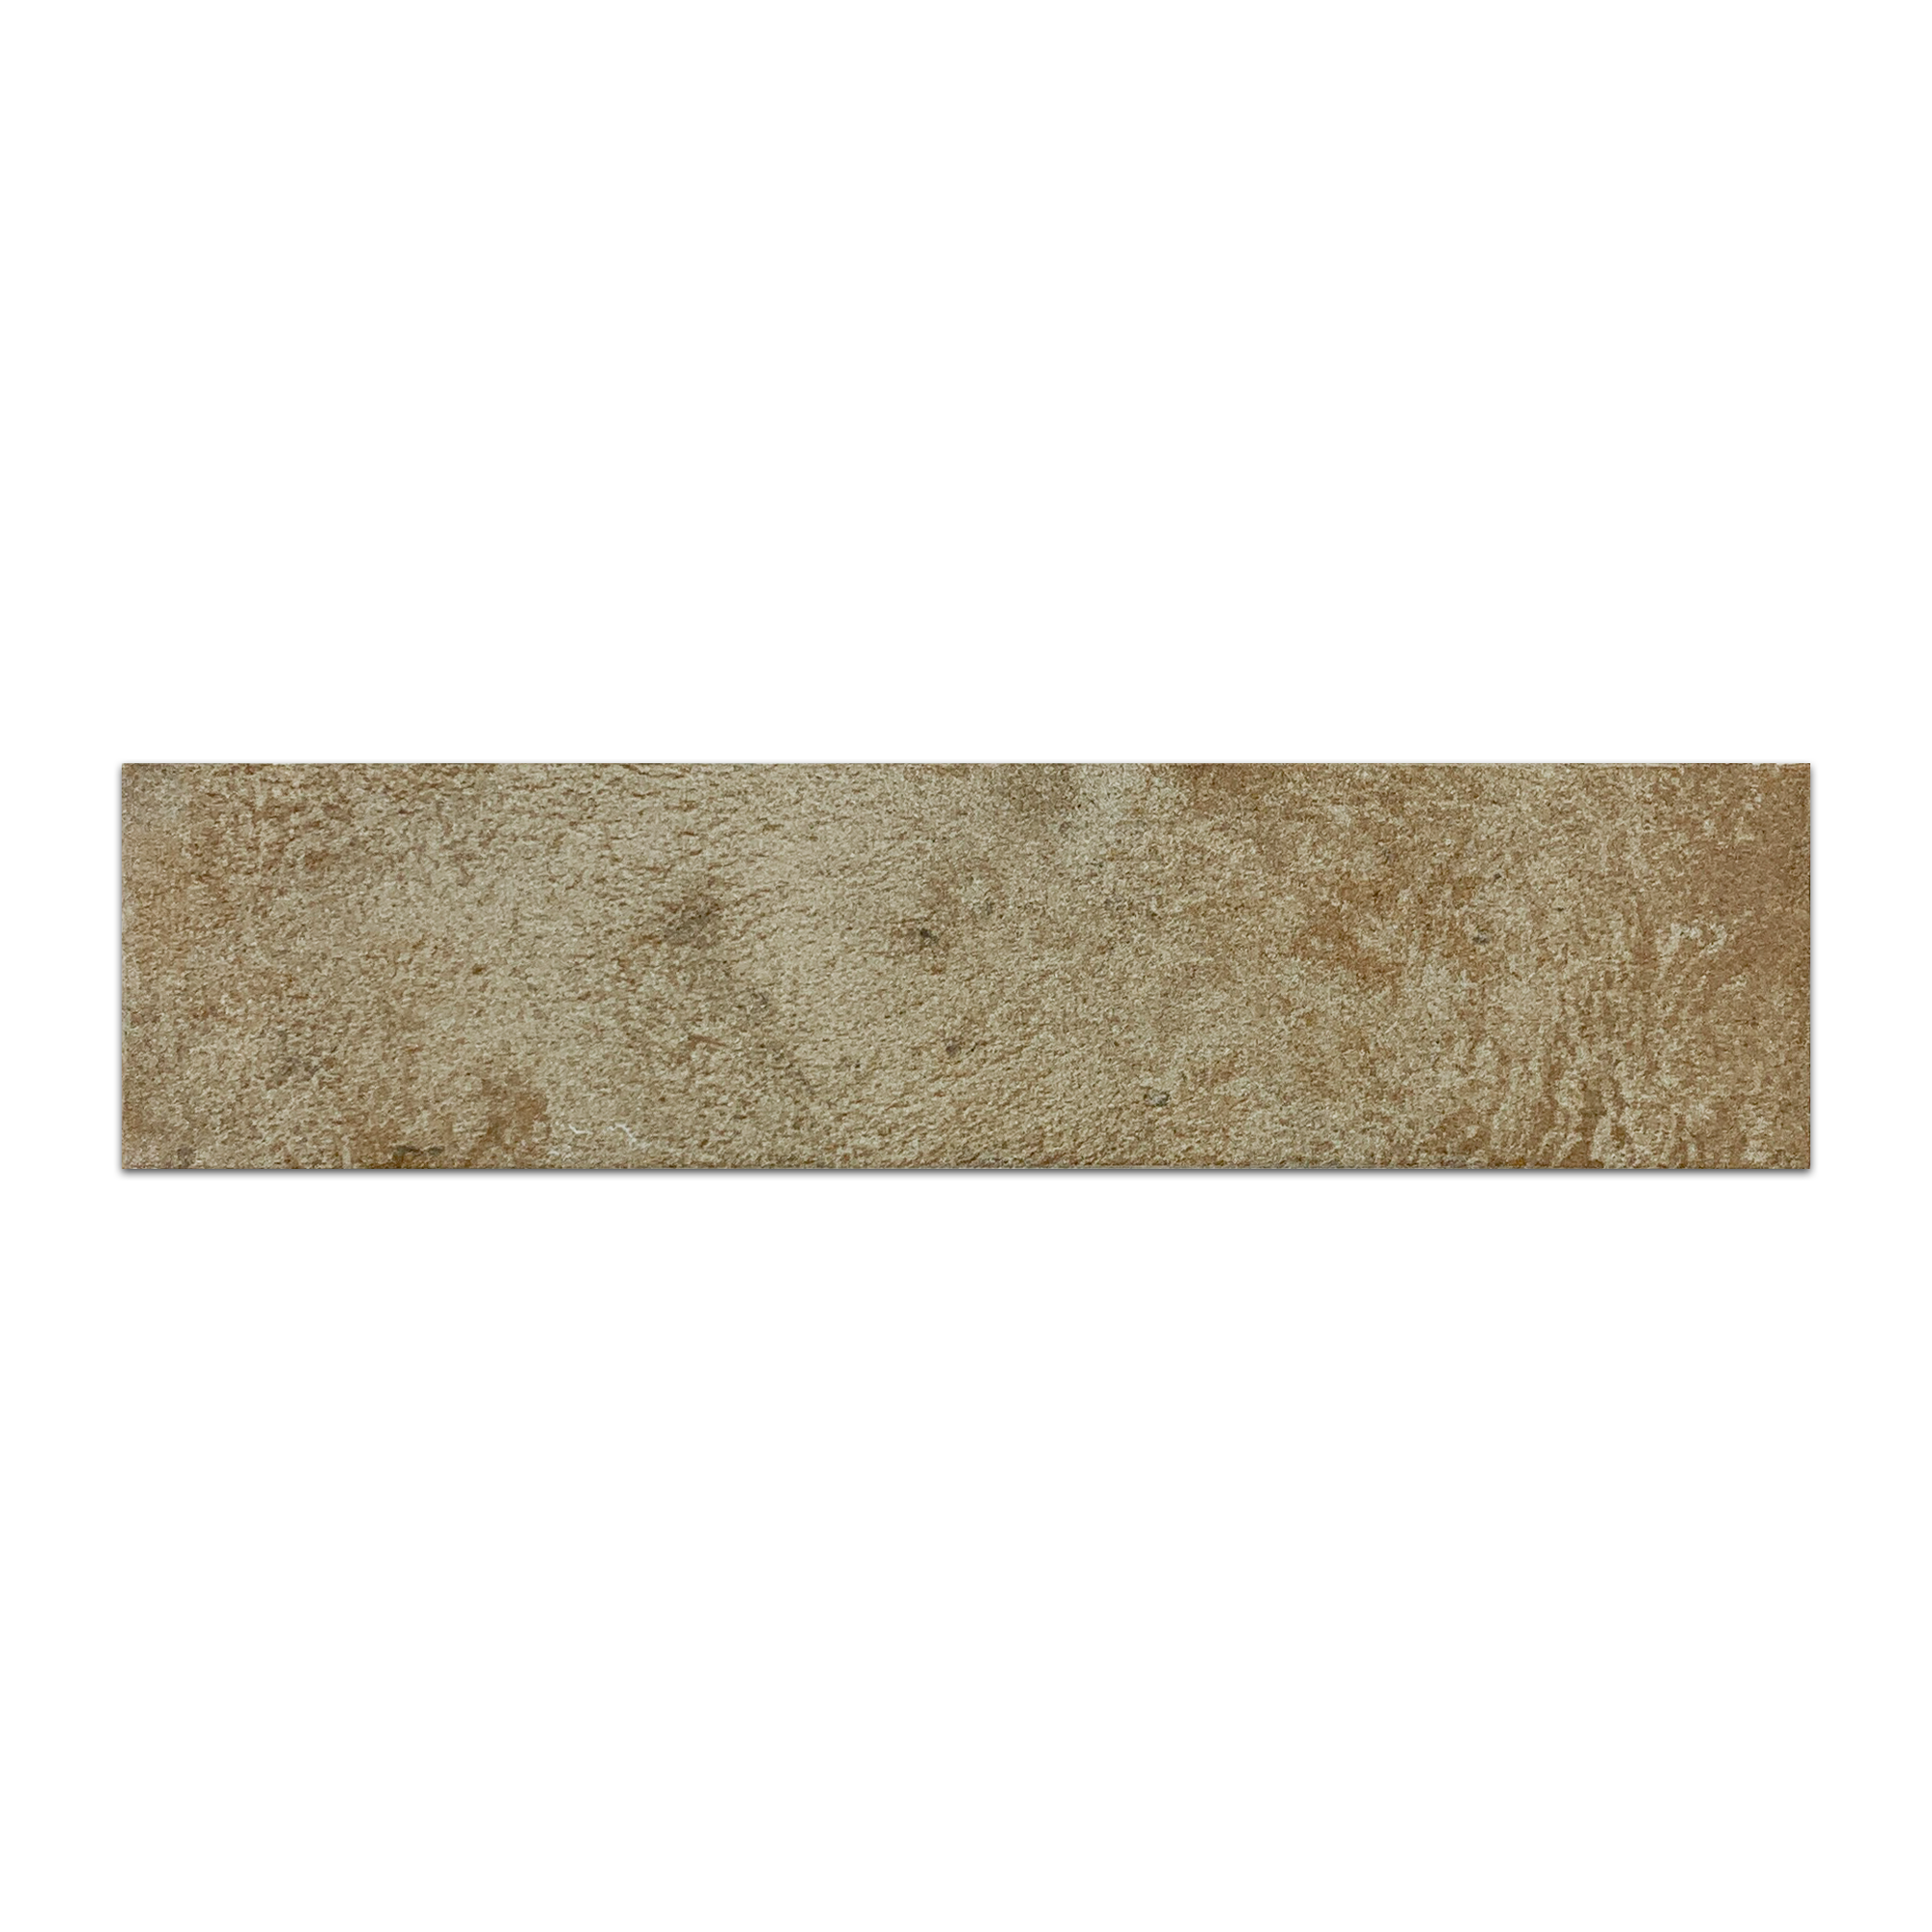 Elon Boston Brick West Porcelain Rectangle Field Tile 2.5x10x0.375 Natural Pressed BC104 Surface Group International Product